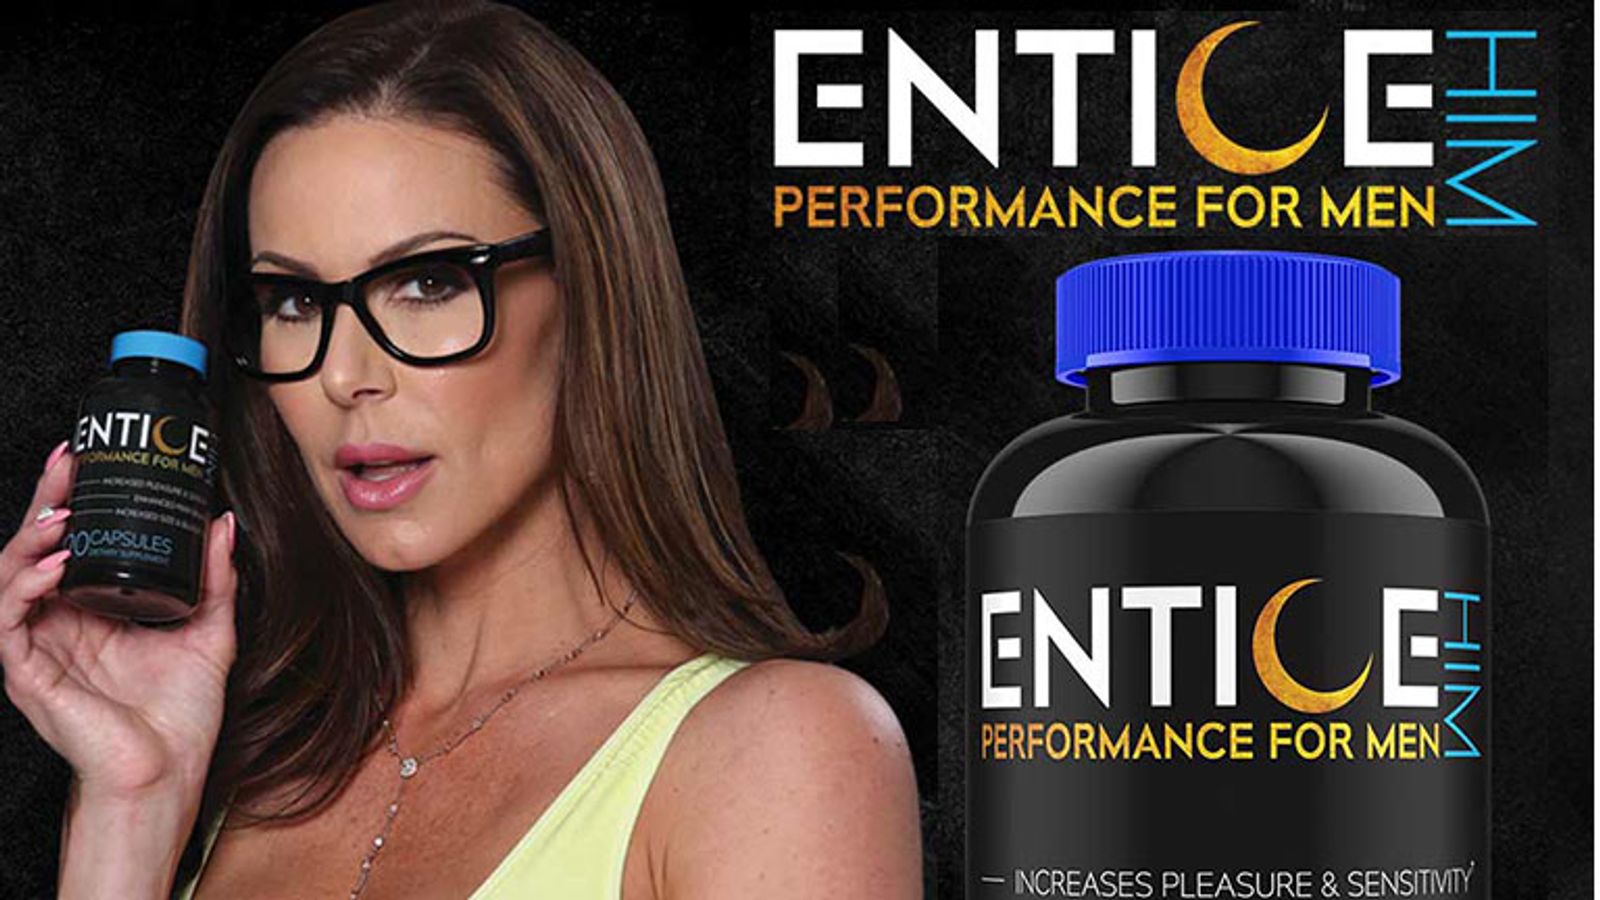 Kendra Lust Launches Entice, a New Line of Sexual Supplements